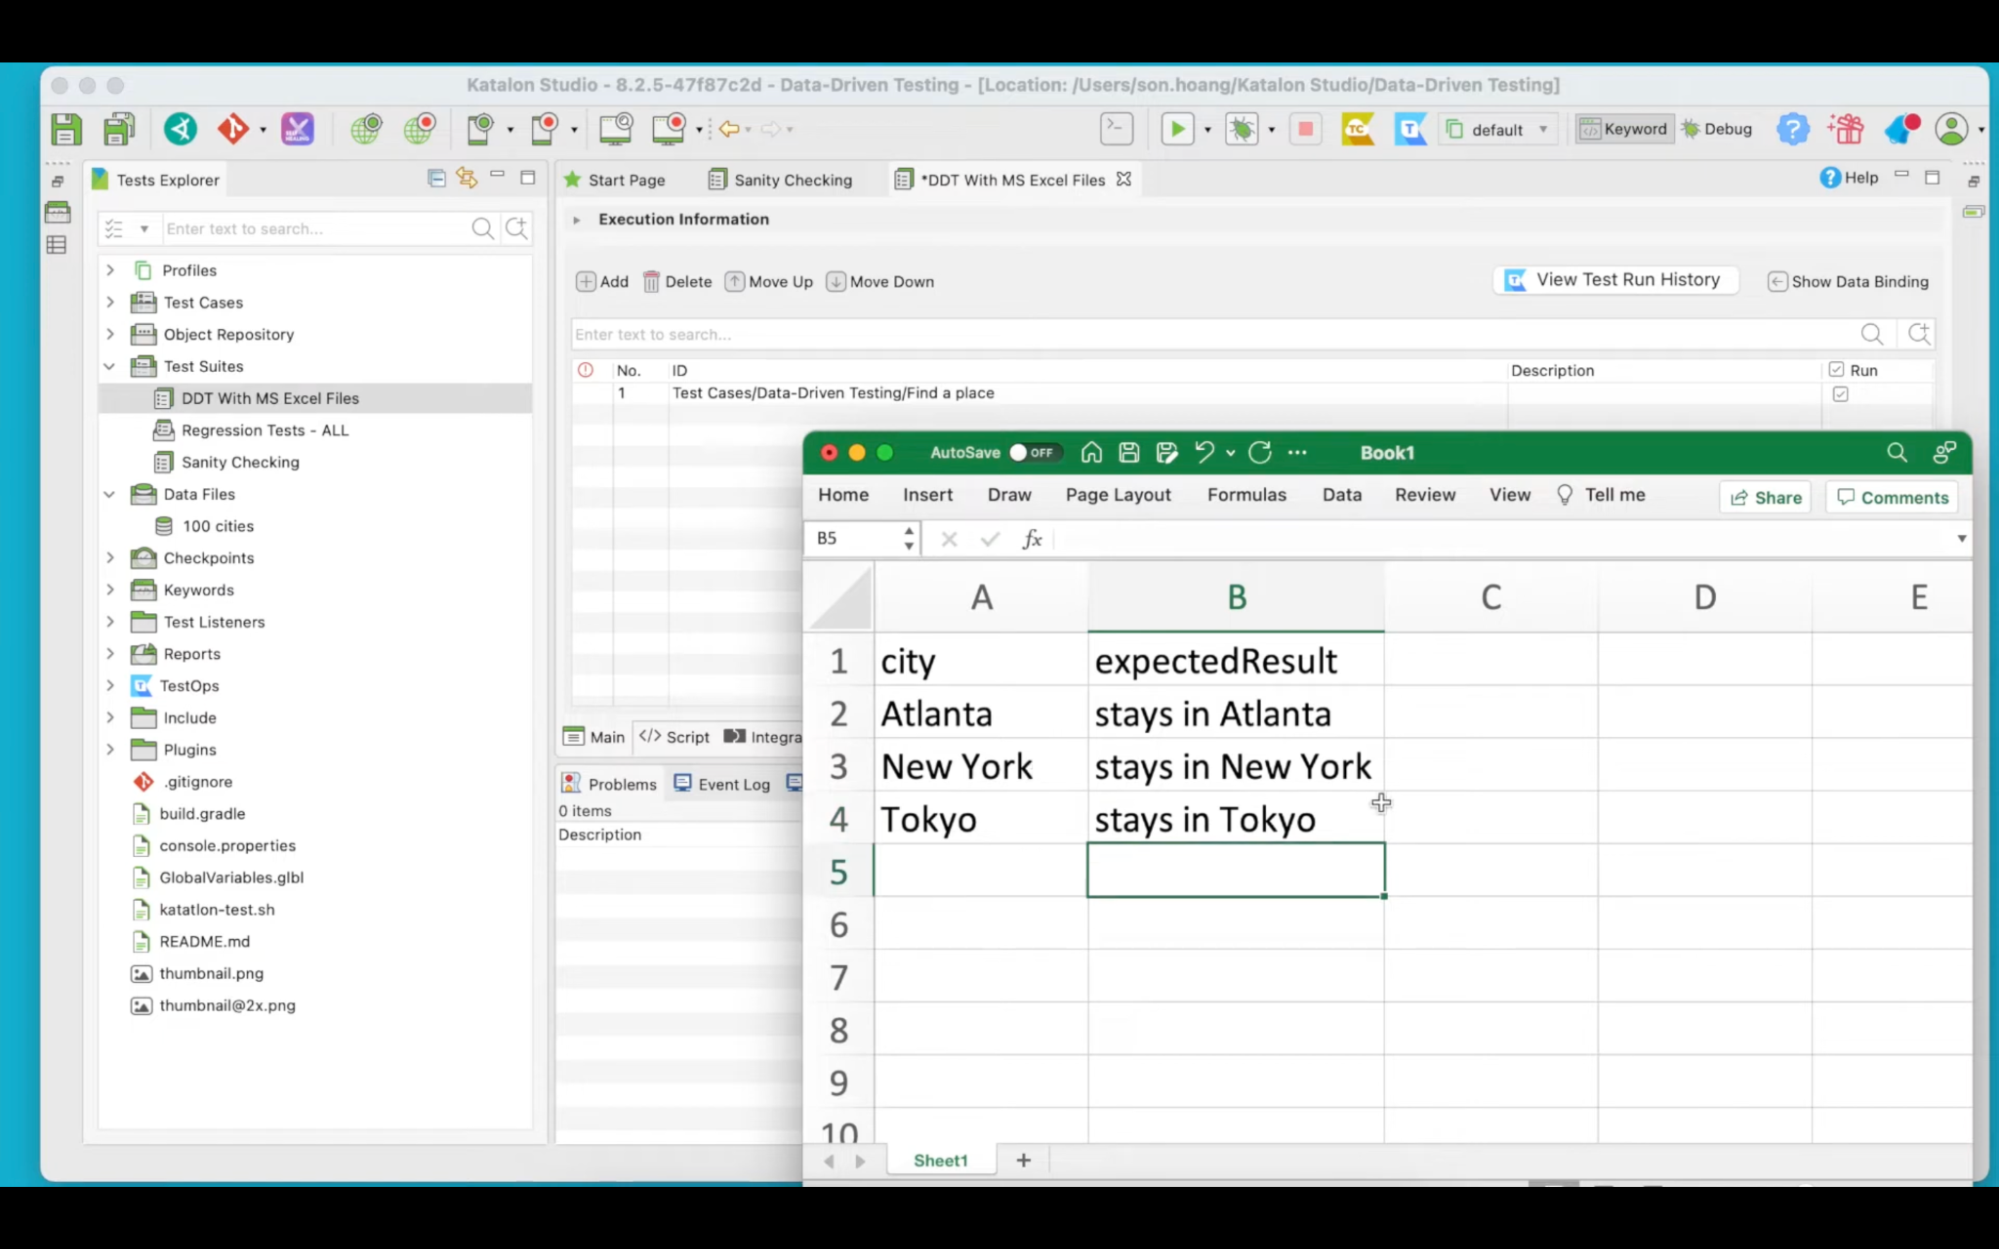 prepare your test data in an Excel sheet